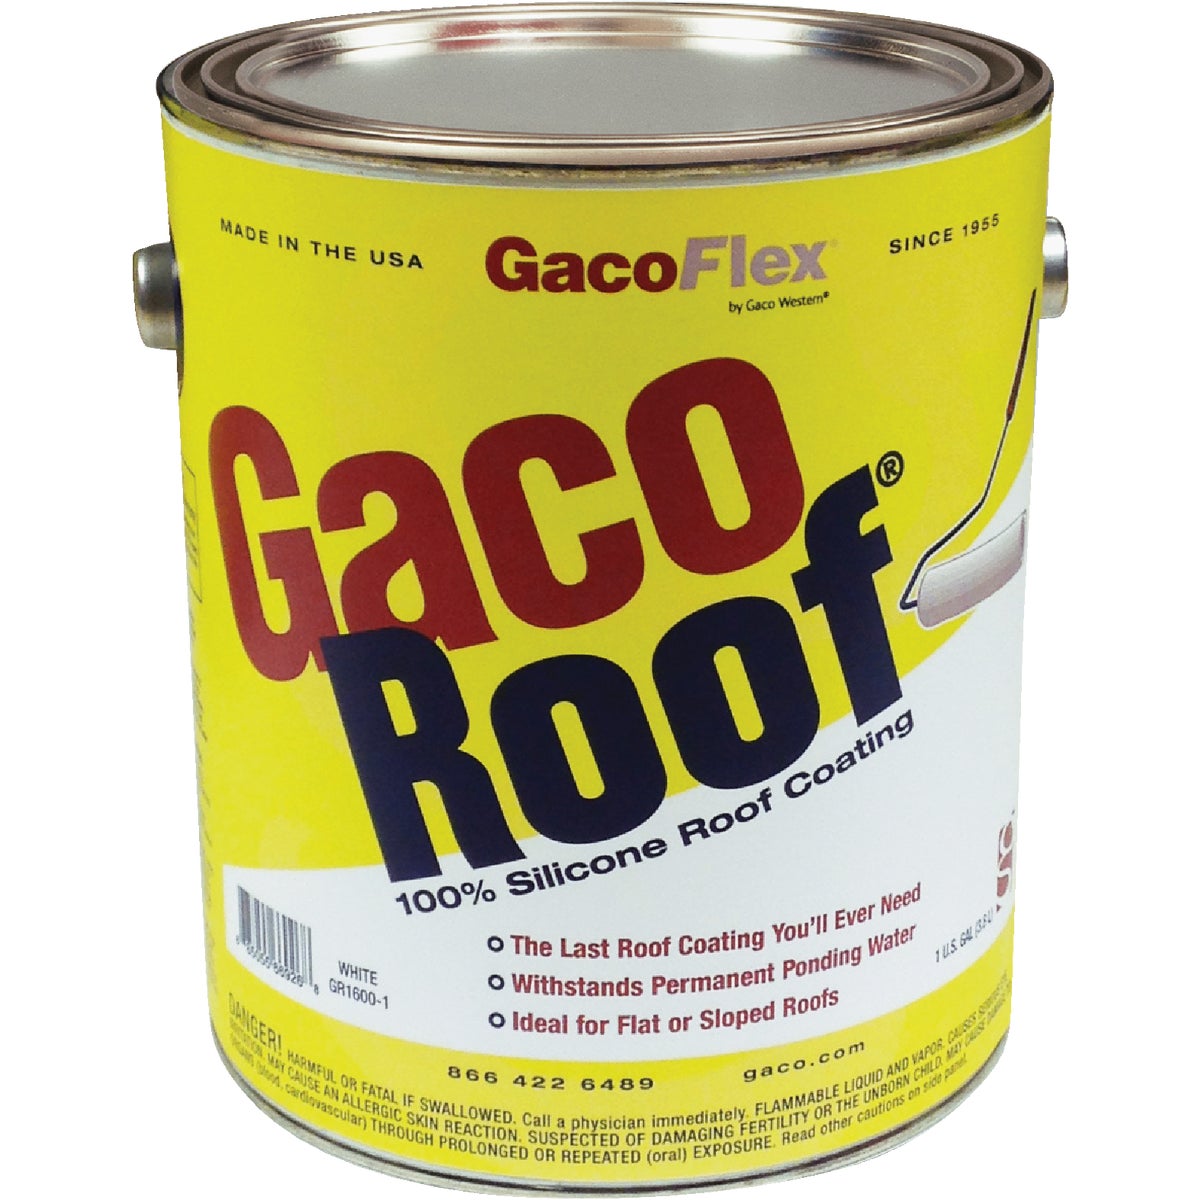 Item 772538, GacoRoof VOC-Compliant 100% Silicone Roof Coating is designed as a 